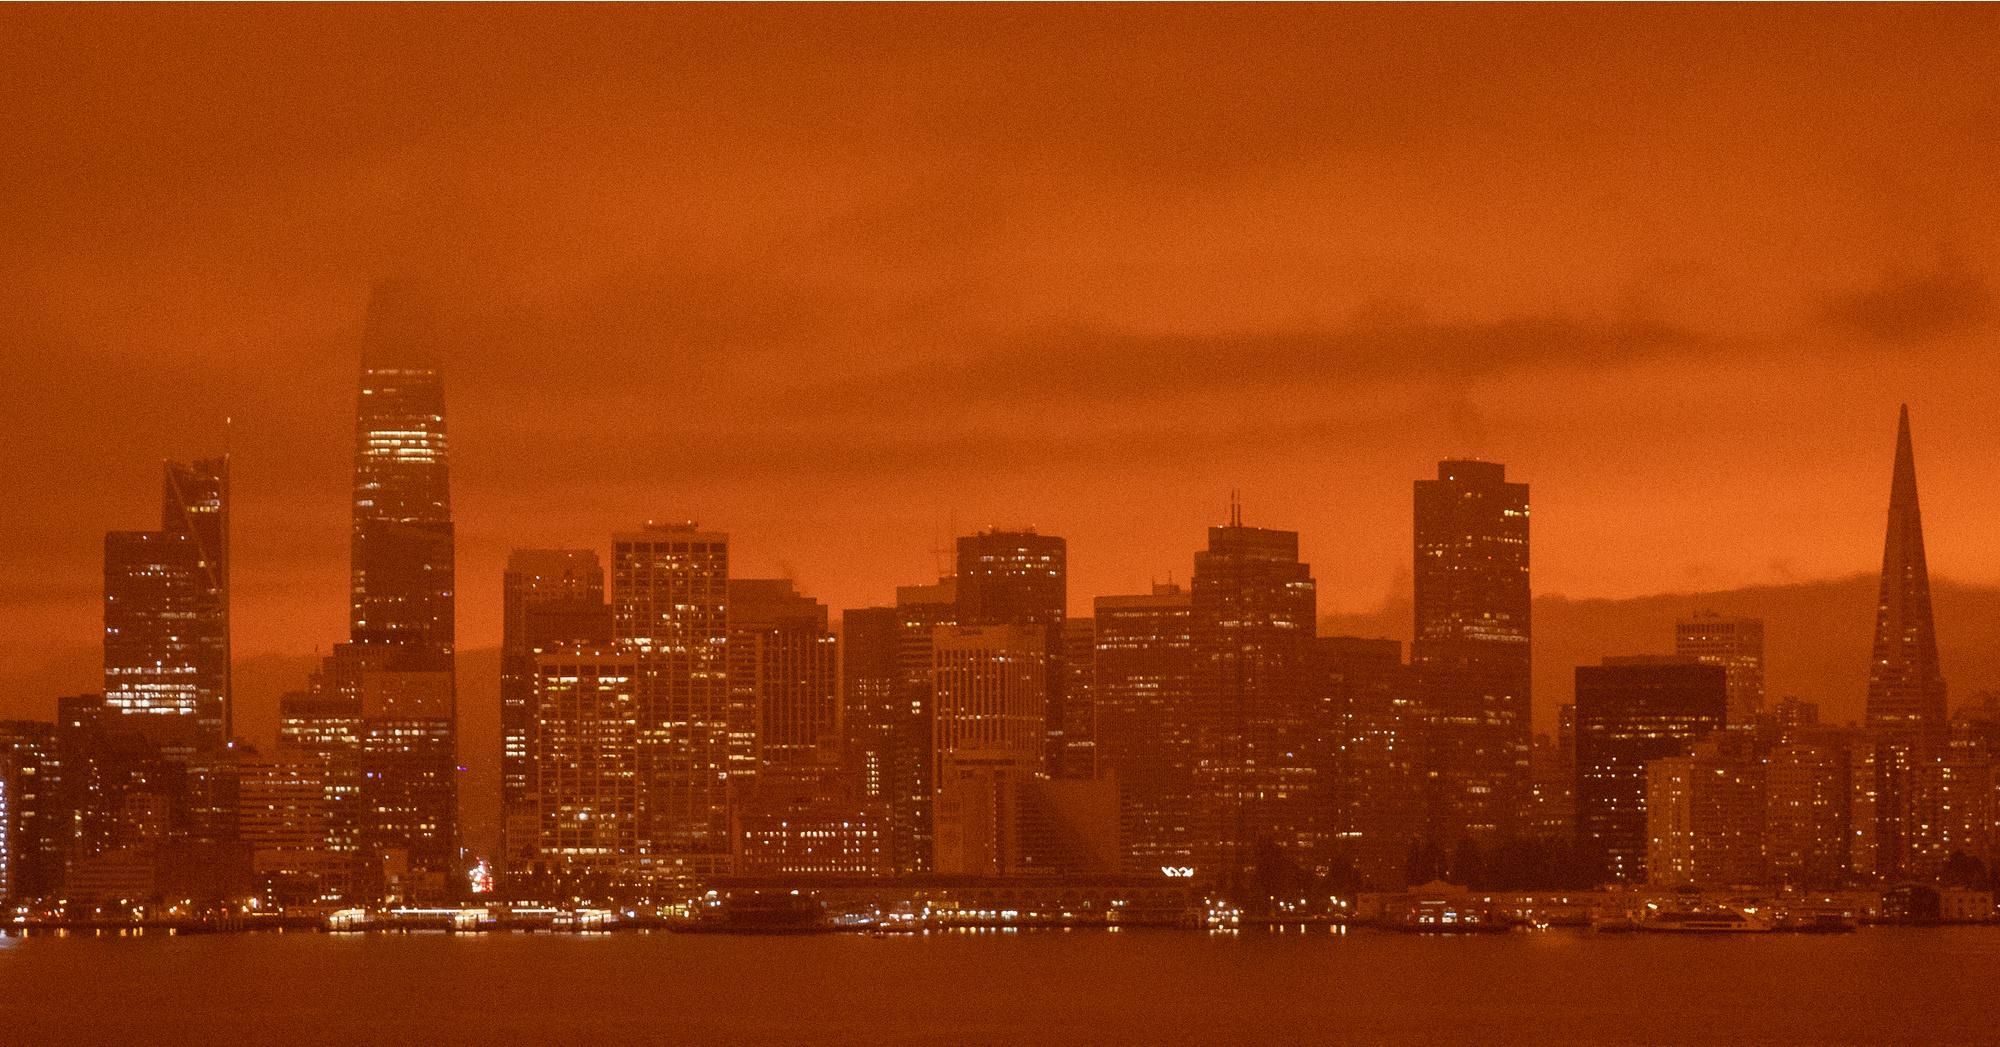 The sky over San Francisco and much of northern California turned orange on September 9, 2020 due to numerous climate-driven wildfires burning in the region. (Photo: Jessica Christian/The San Francisco Chronicle via Getty Images) 